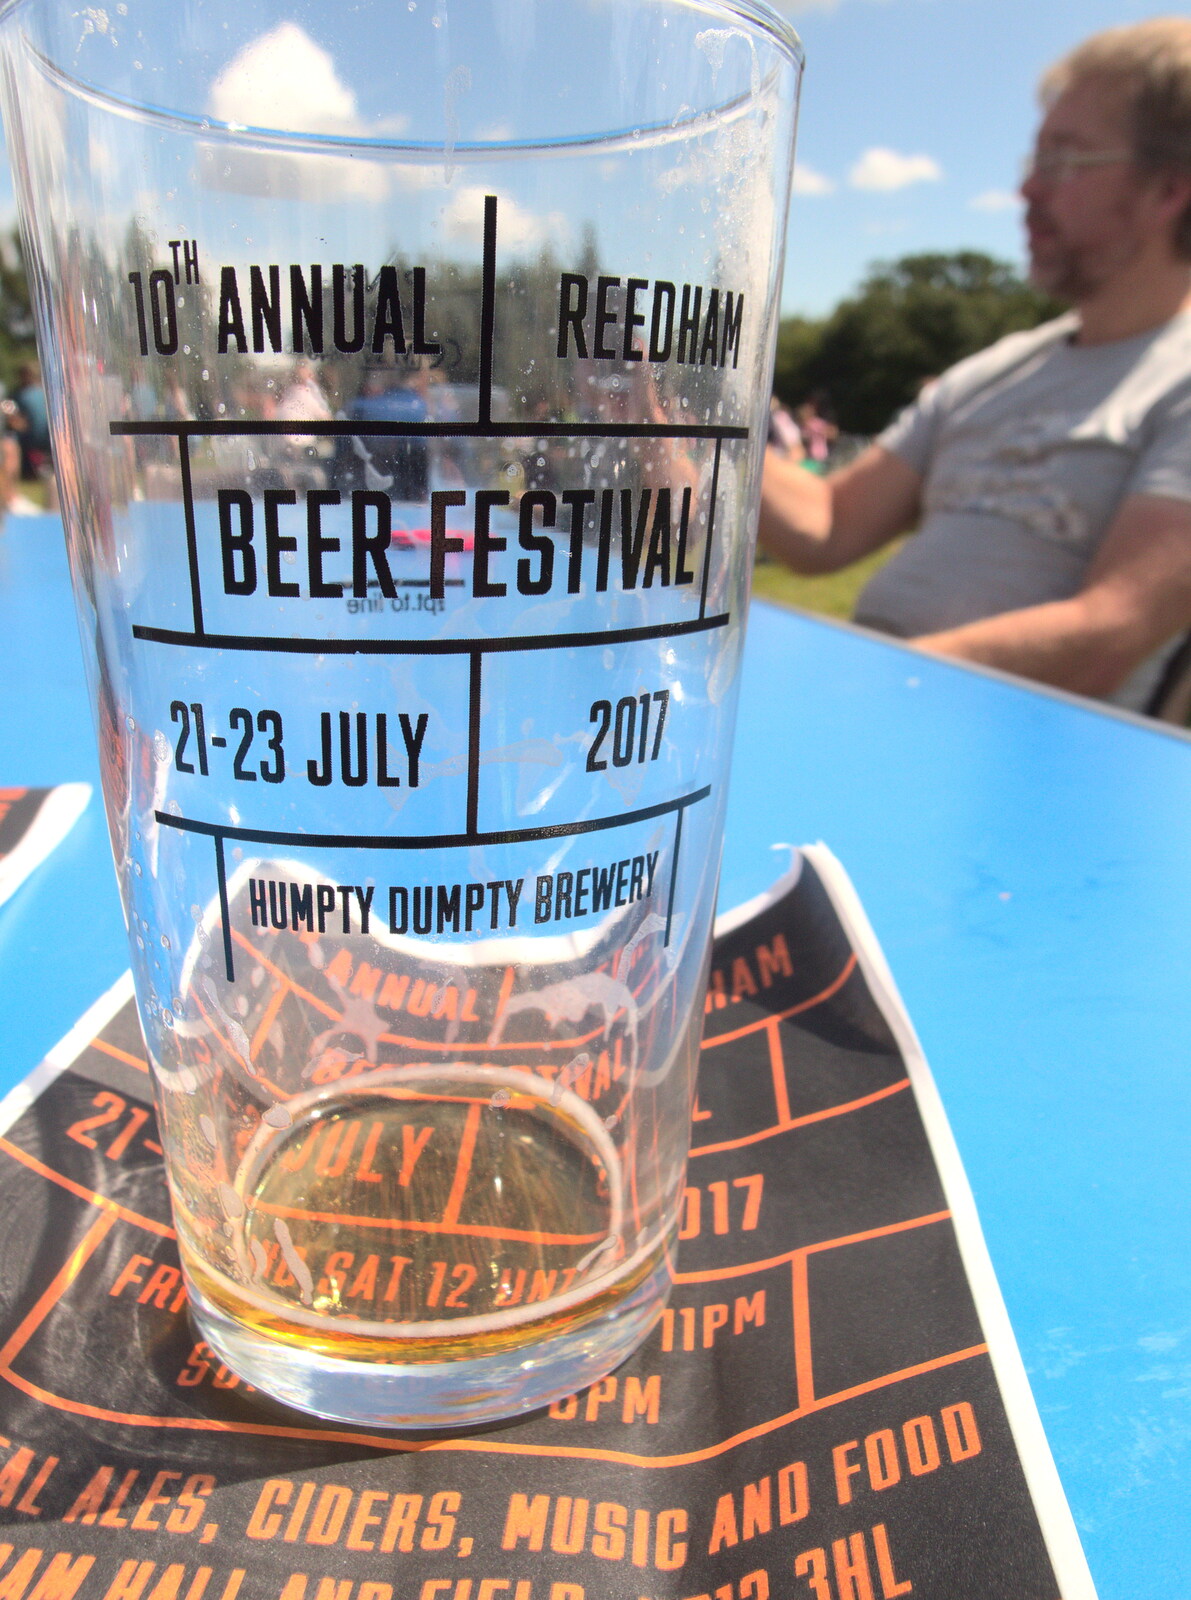 Nosher's glass from The Humpty Dumpty Beer Festival, Reedham, Norfolk - 22nd July 2017